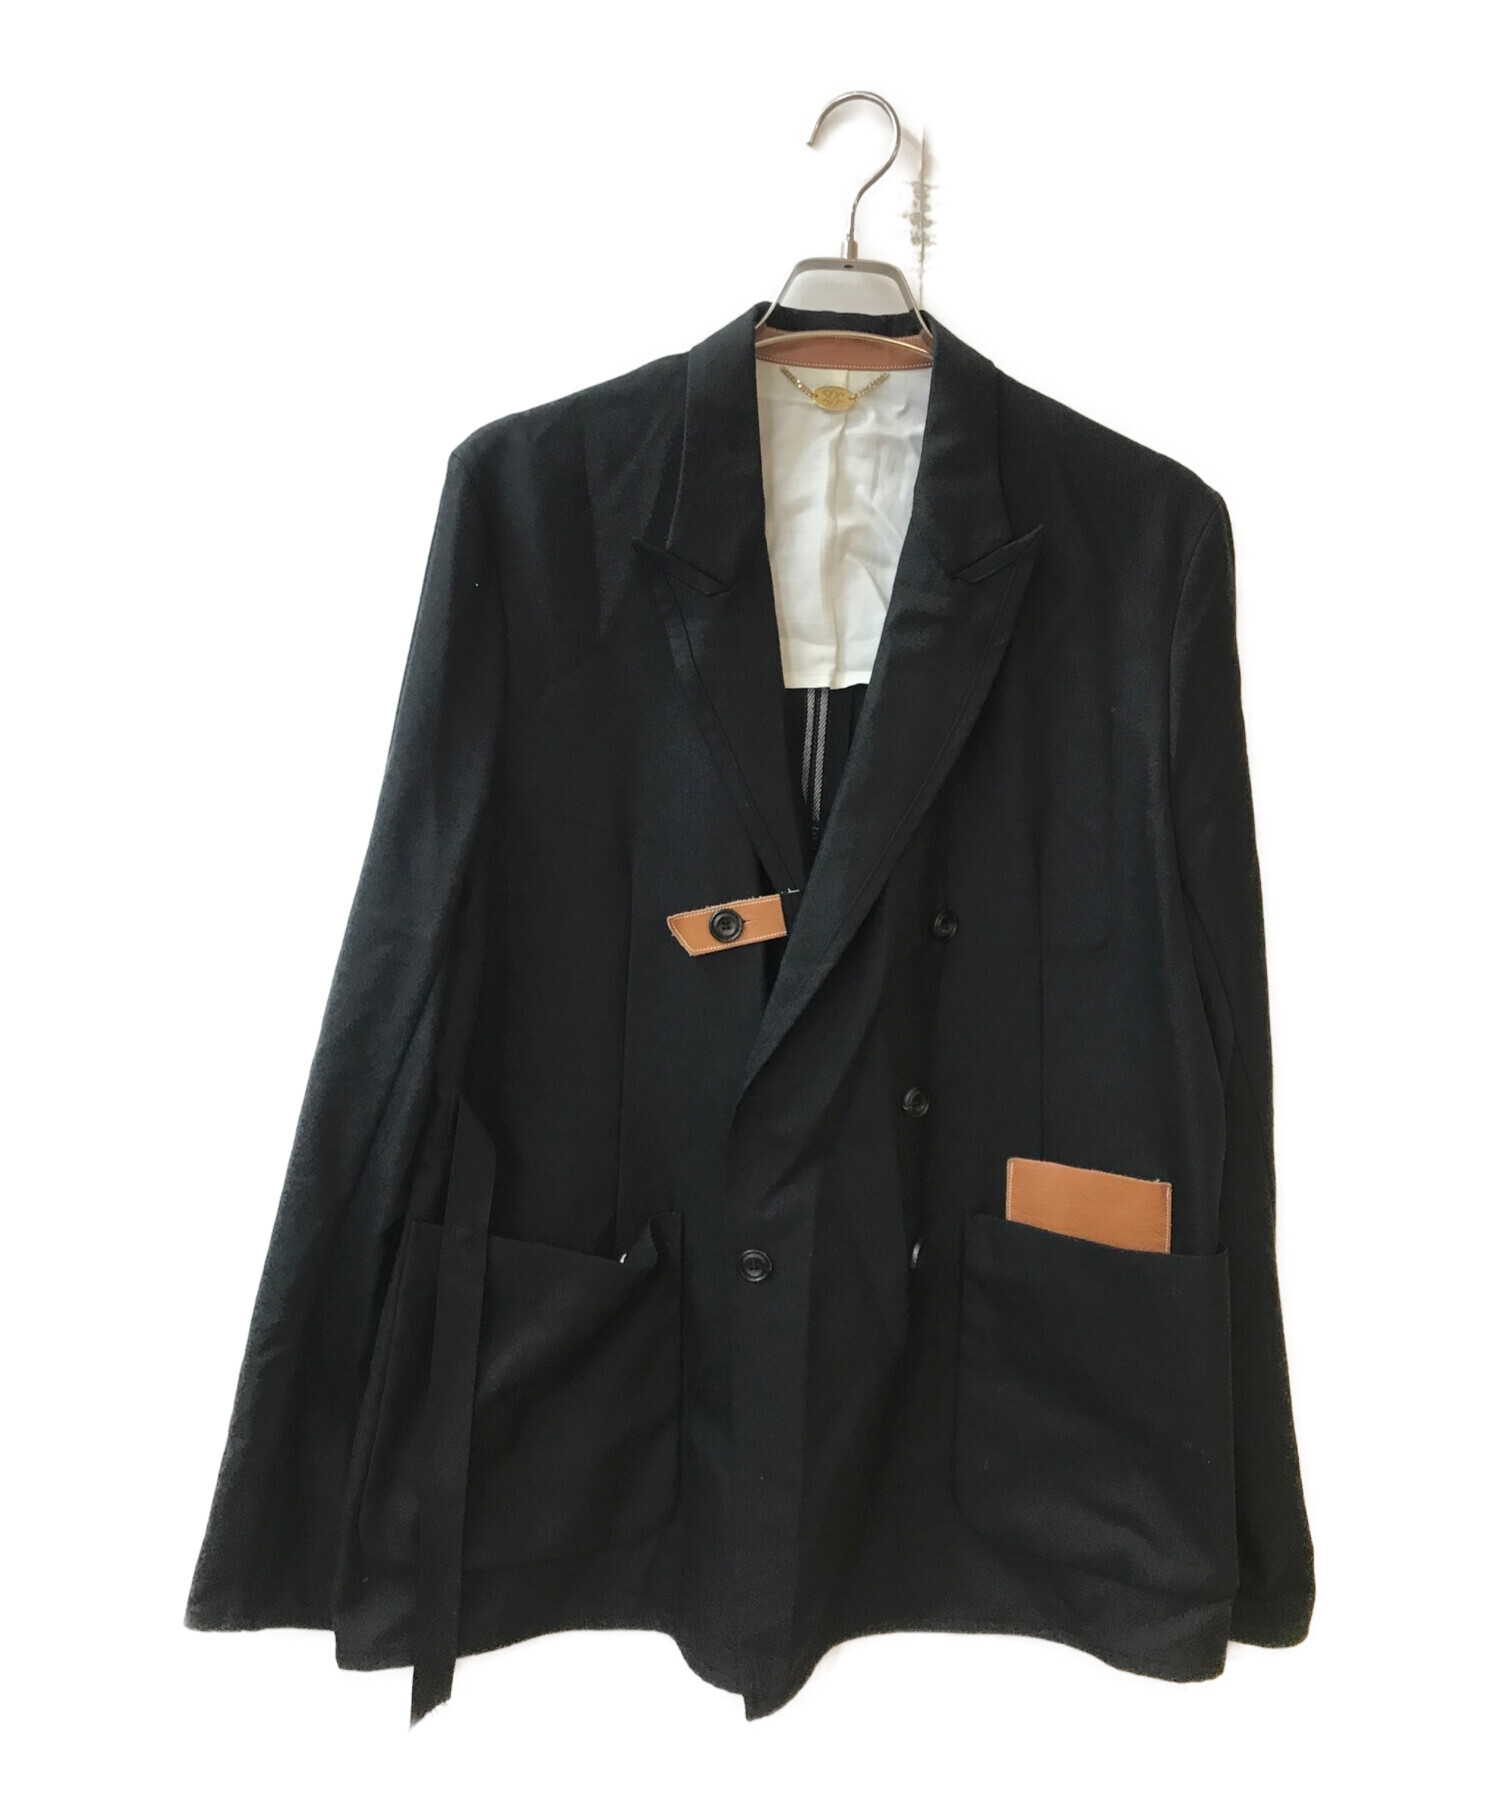 N.M Thickened Double-Breasted jacket【2】